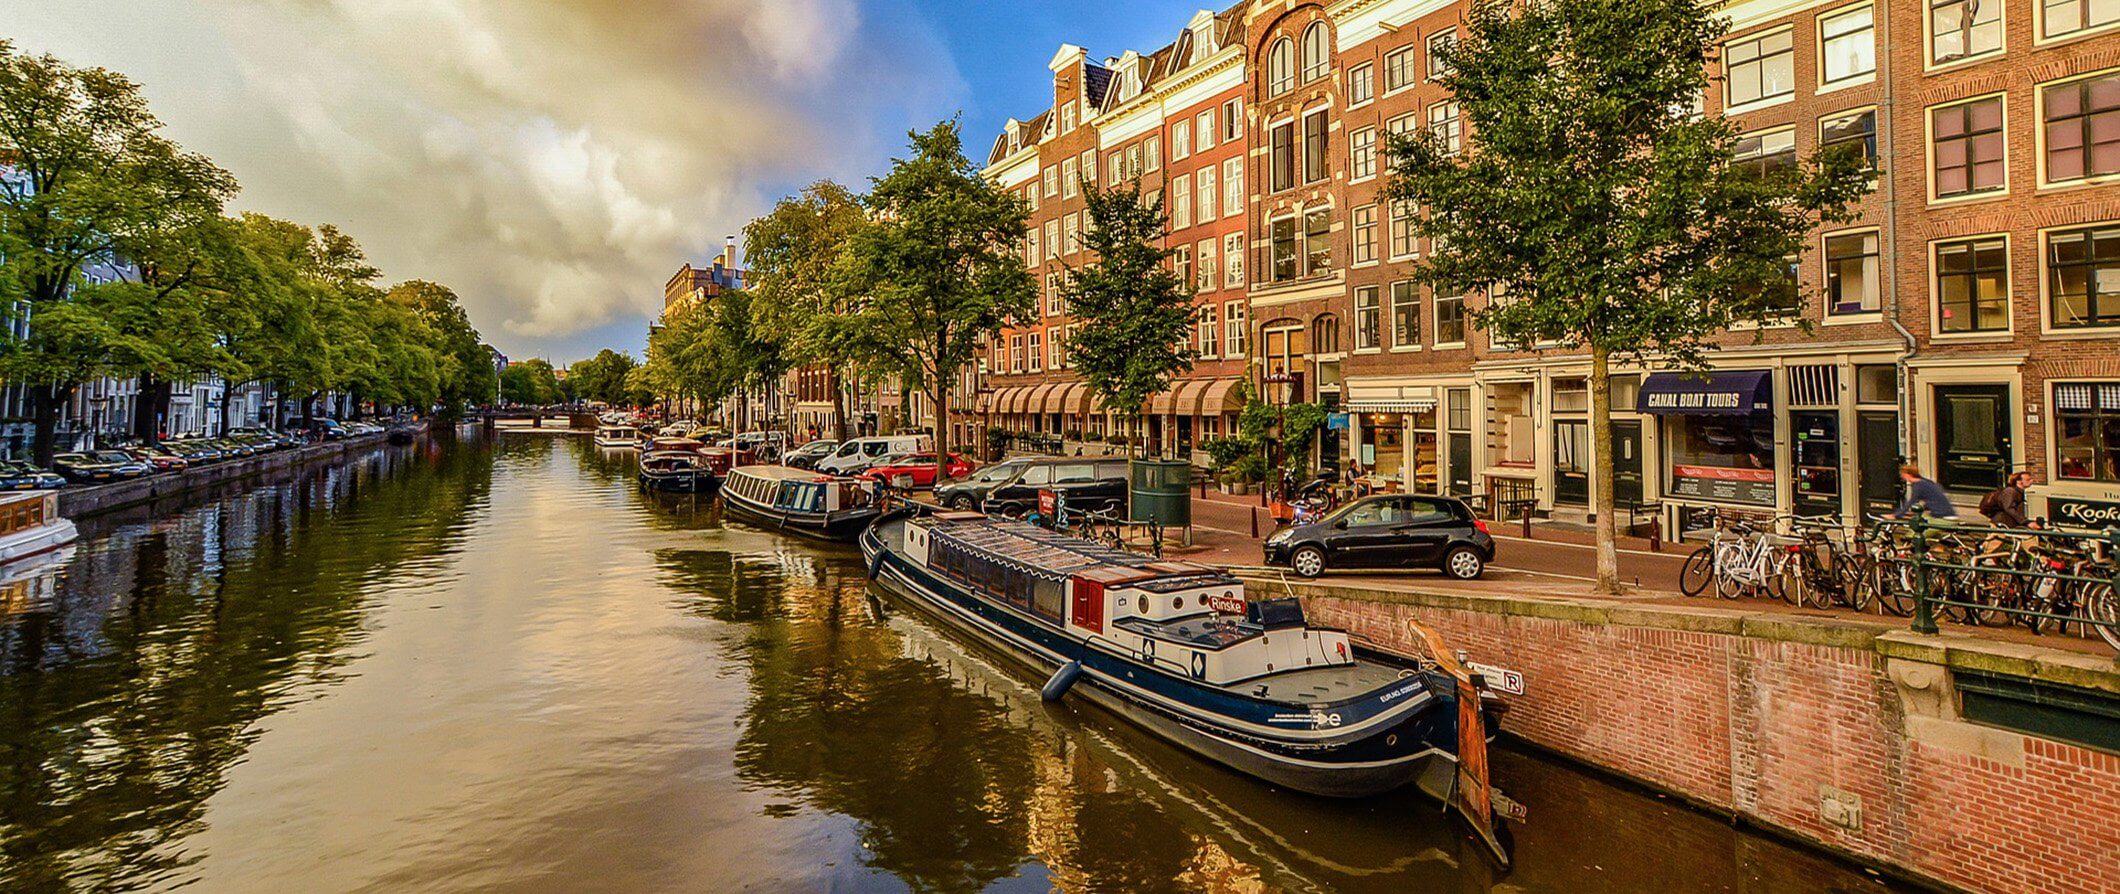 Amsterdam Backpacking & Travel Guide (Updated 2022)